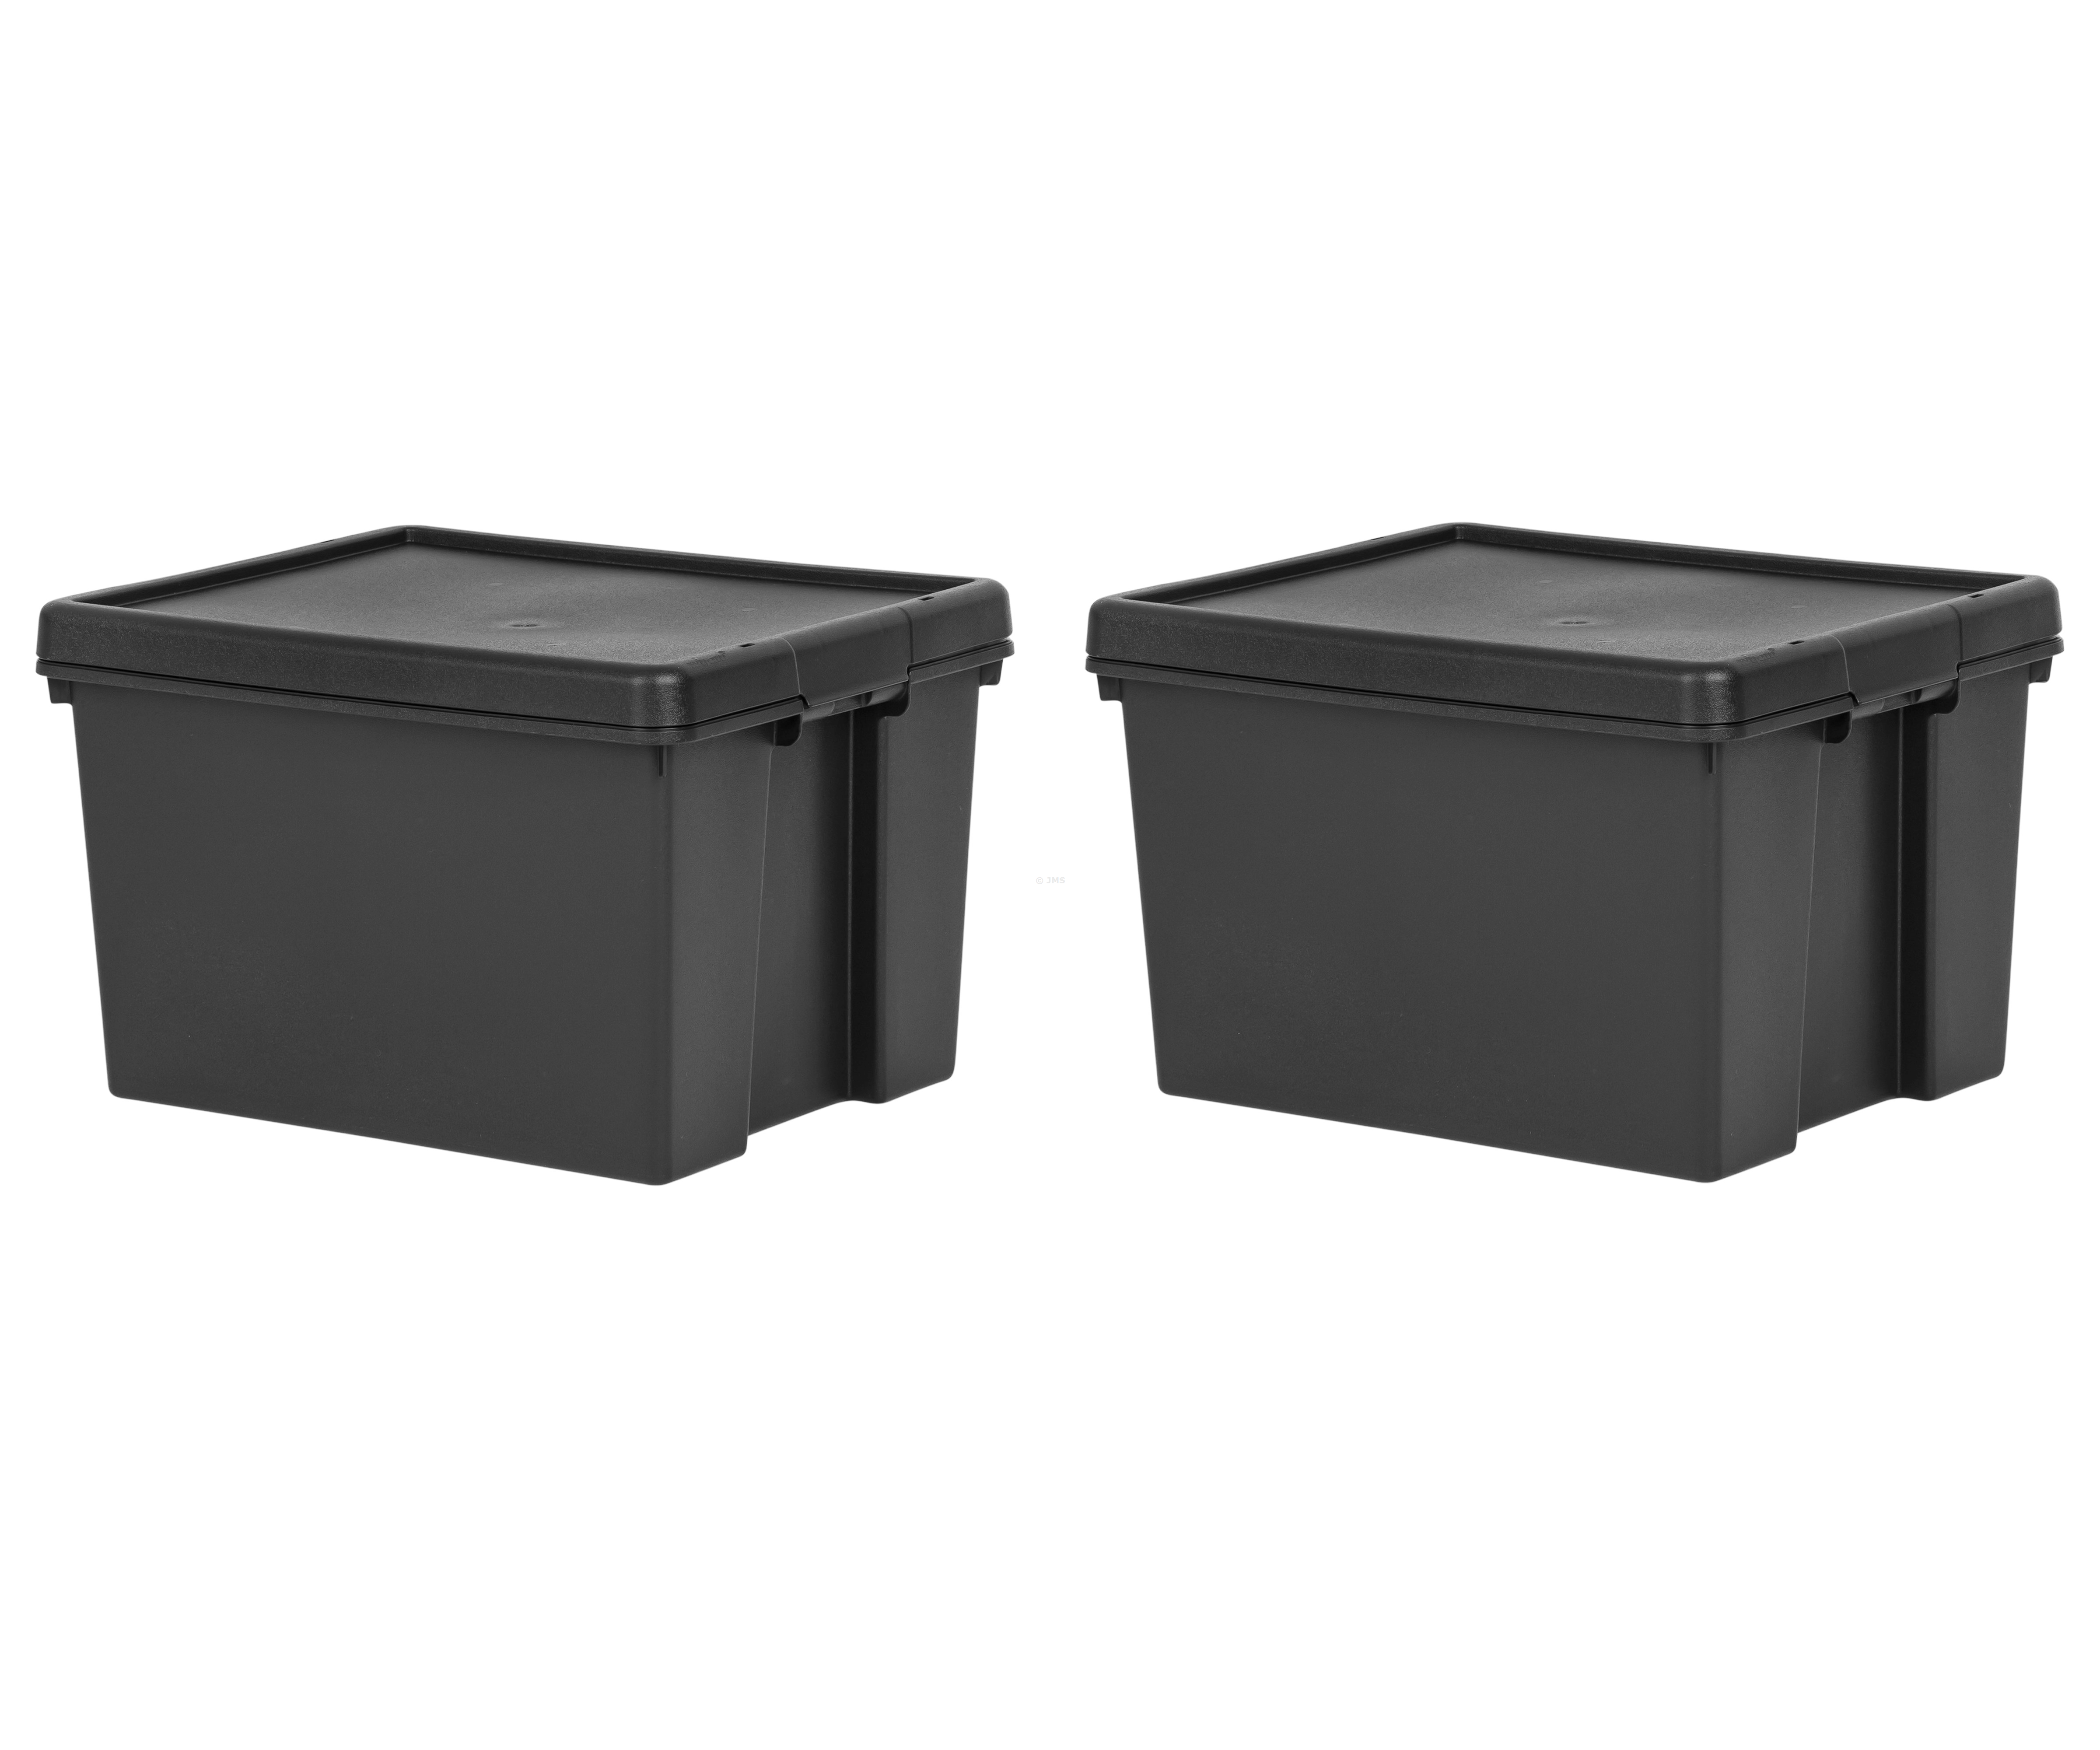 [Set of 2] Heavy Duty 45L Black Storage Box with Lid Recycled Plastic Stackable Nestable Boxes Home Office Garage Toolbox